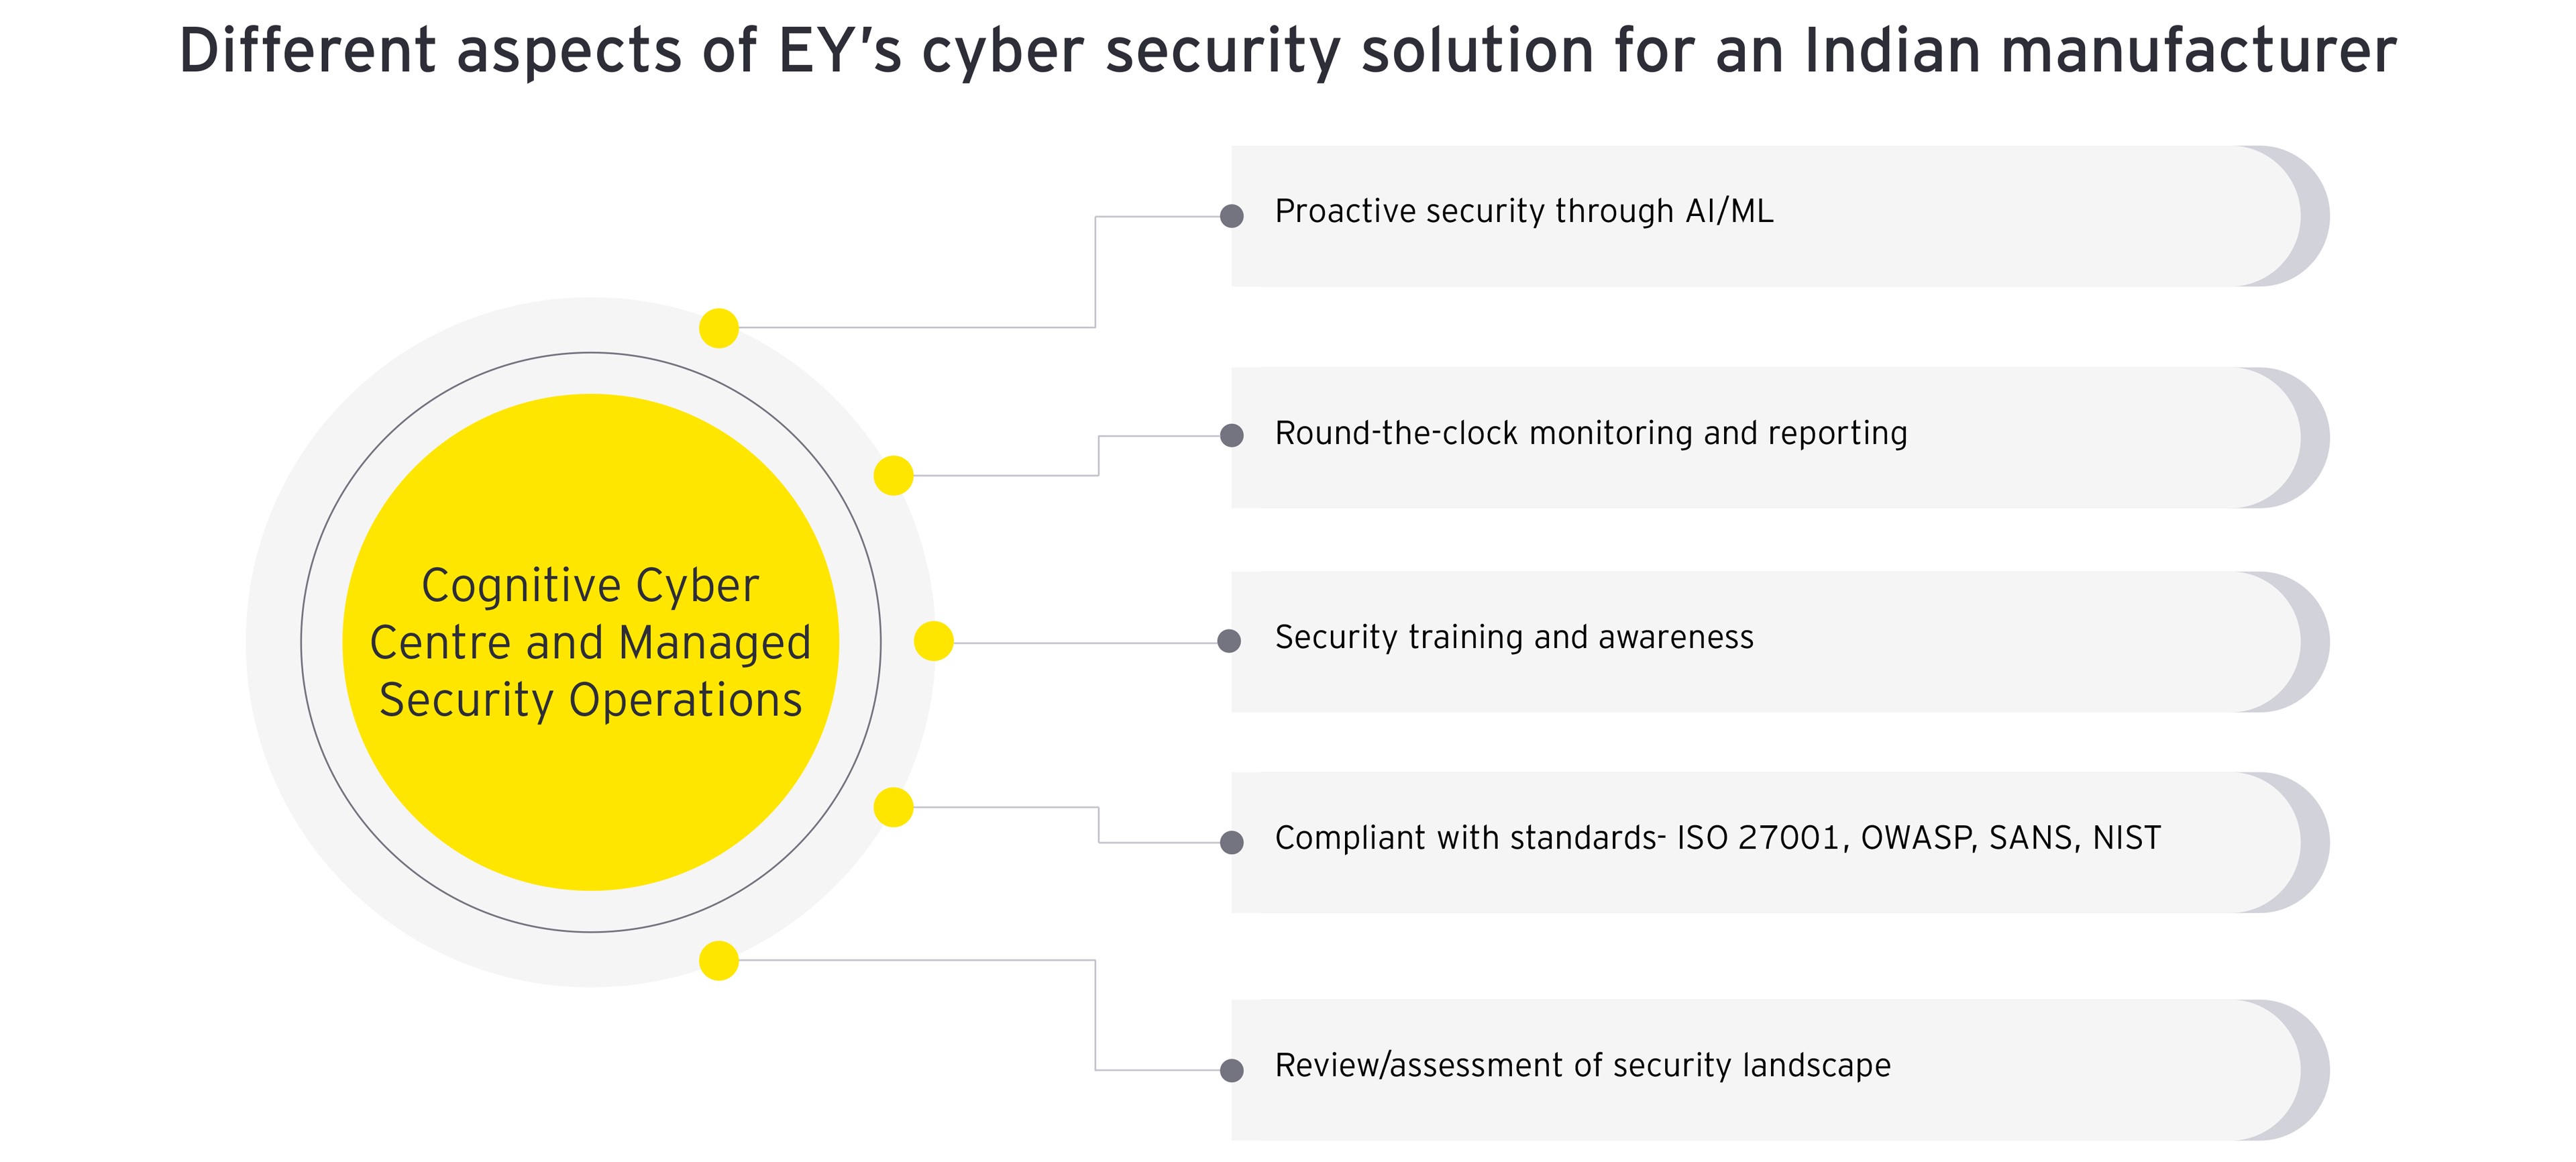 Different aspects of EY’s cyber security solution for an Indian manufacturer